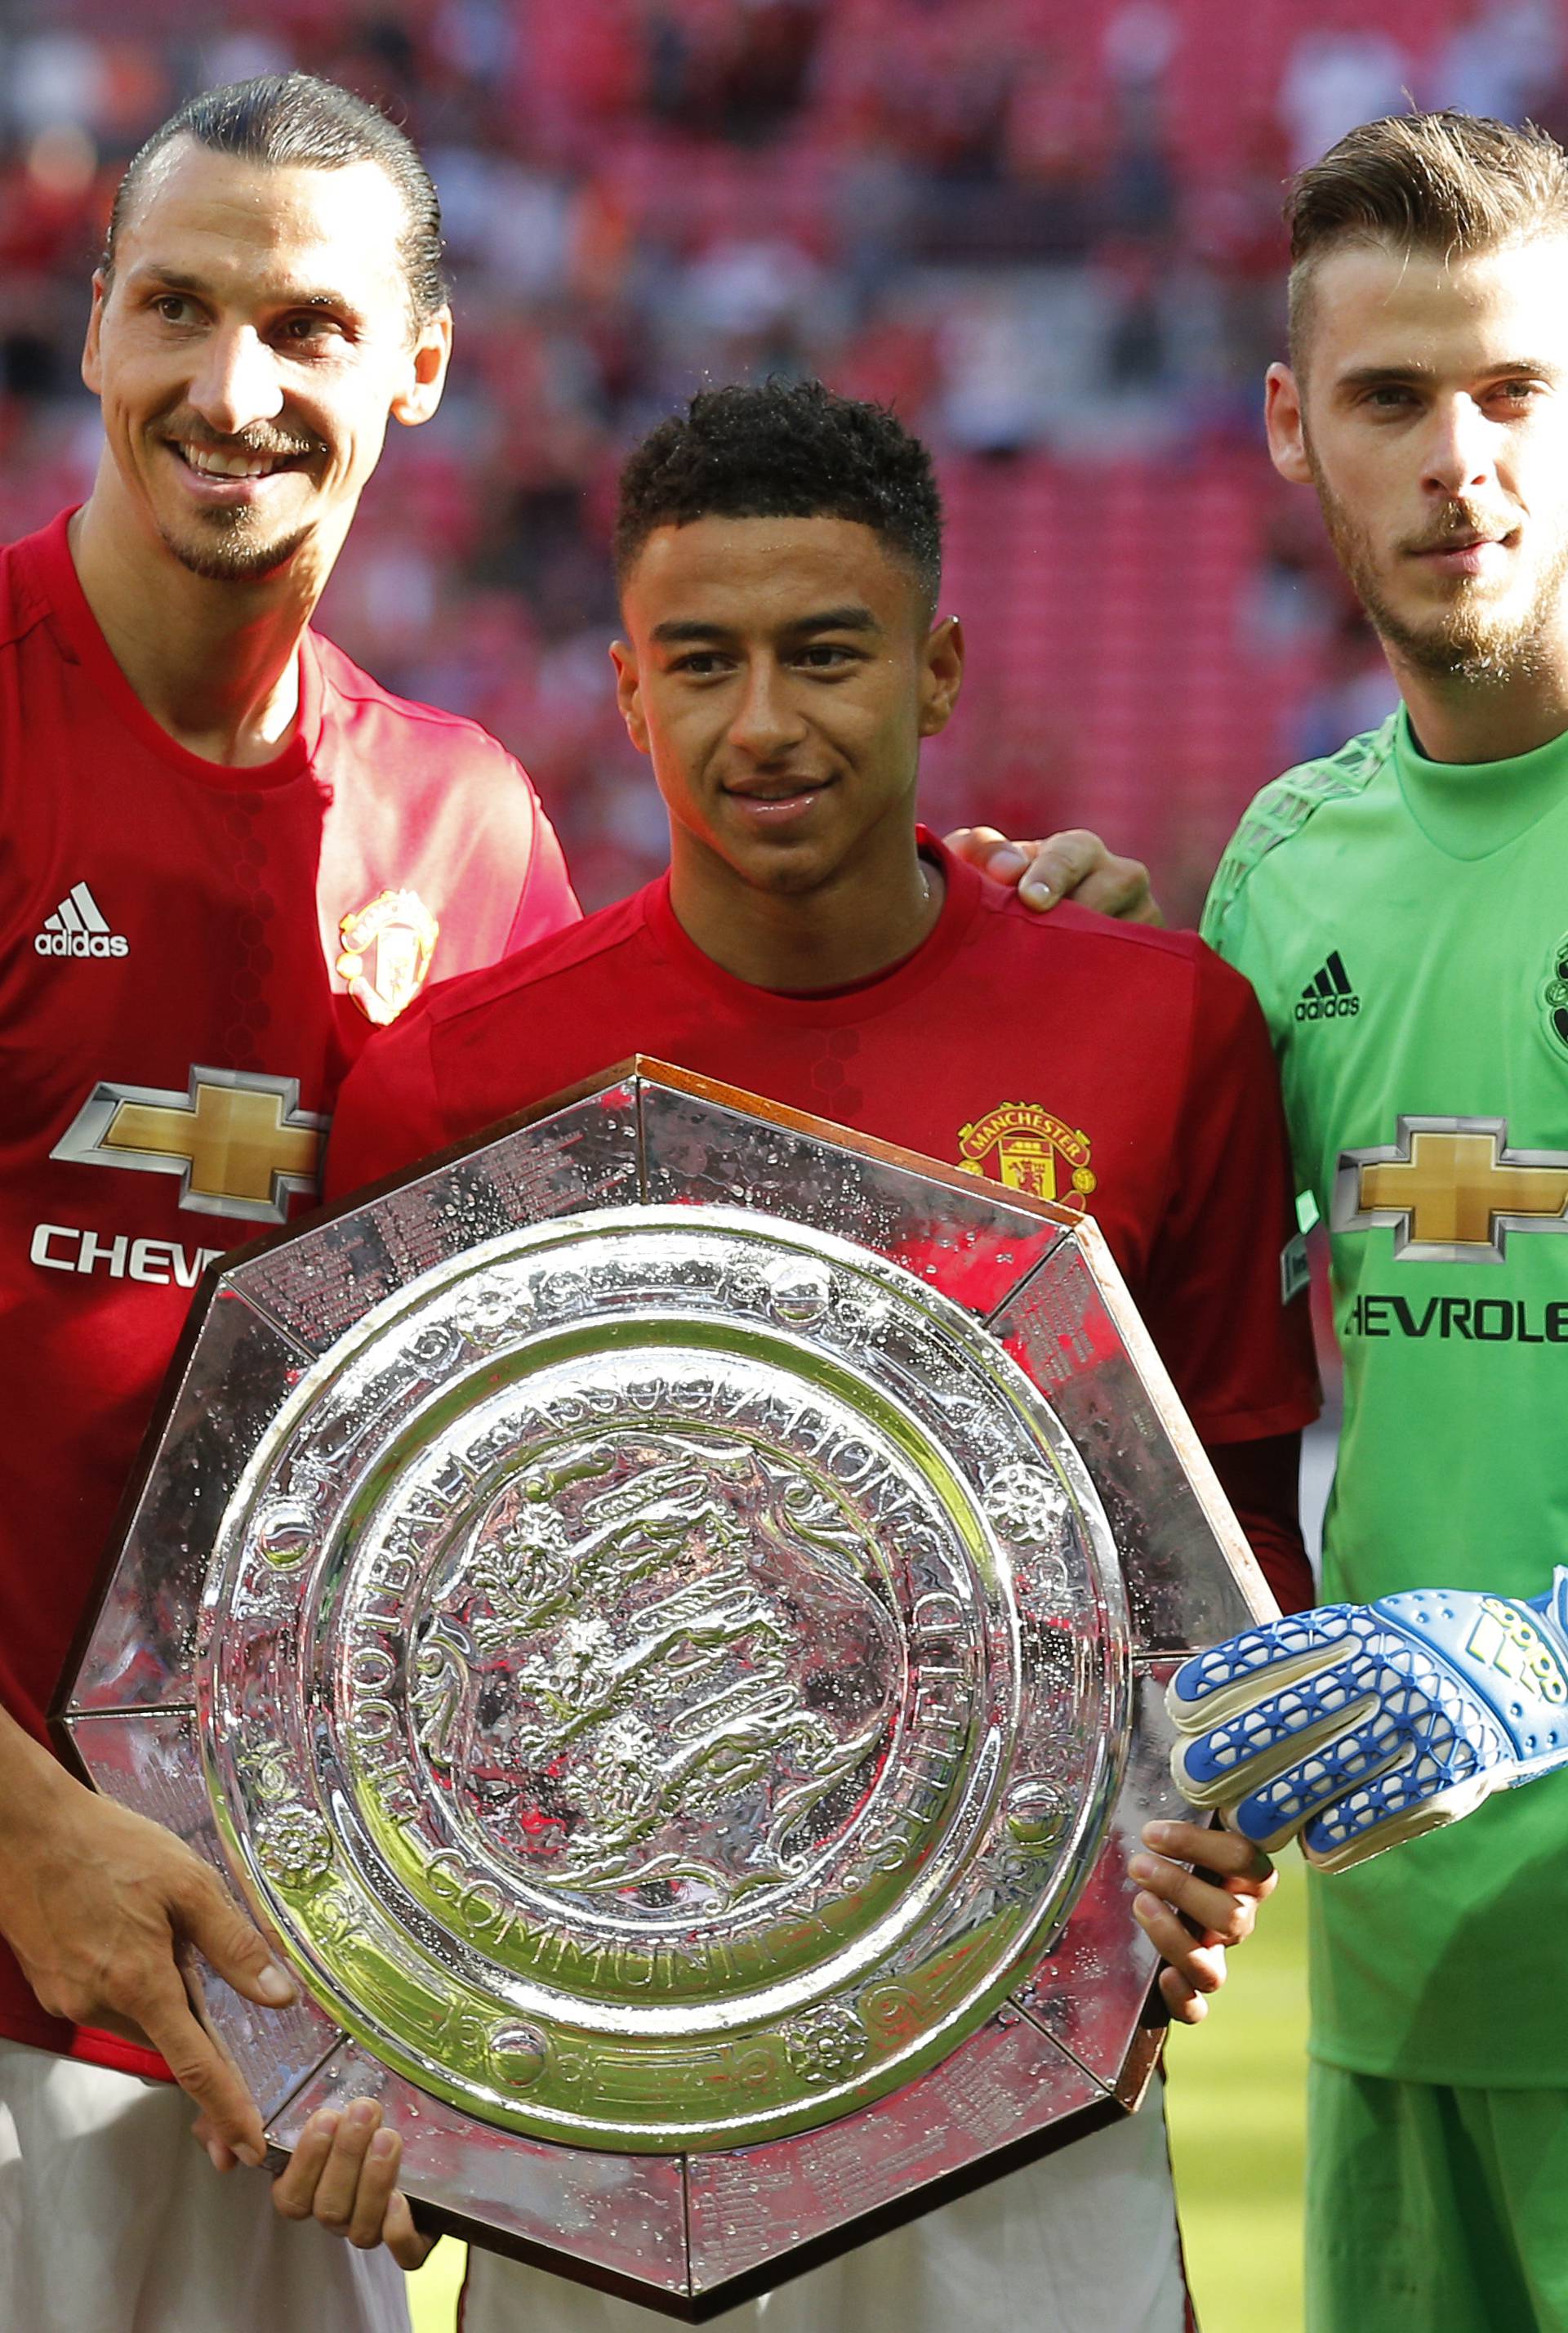 Leicester City v Manchester United - FA Community Shield